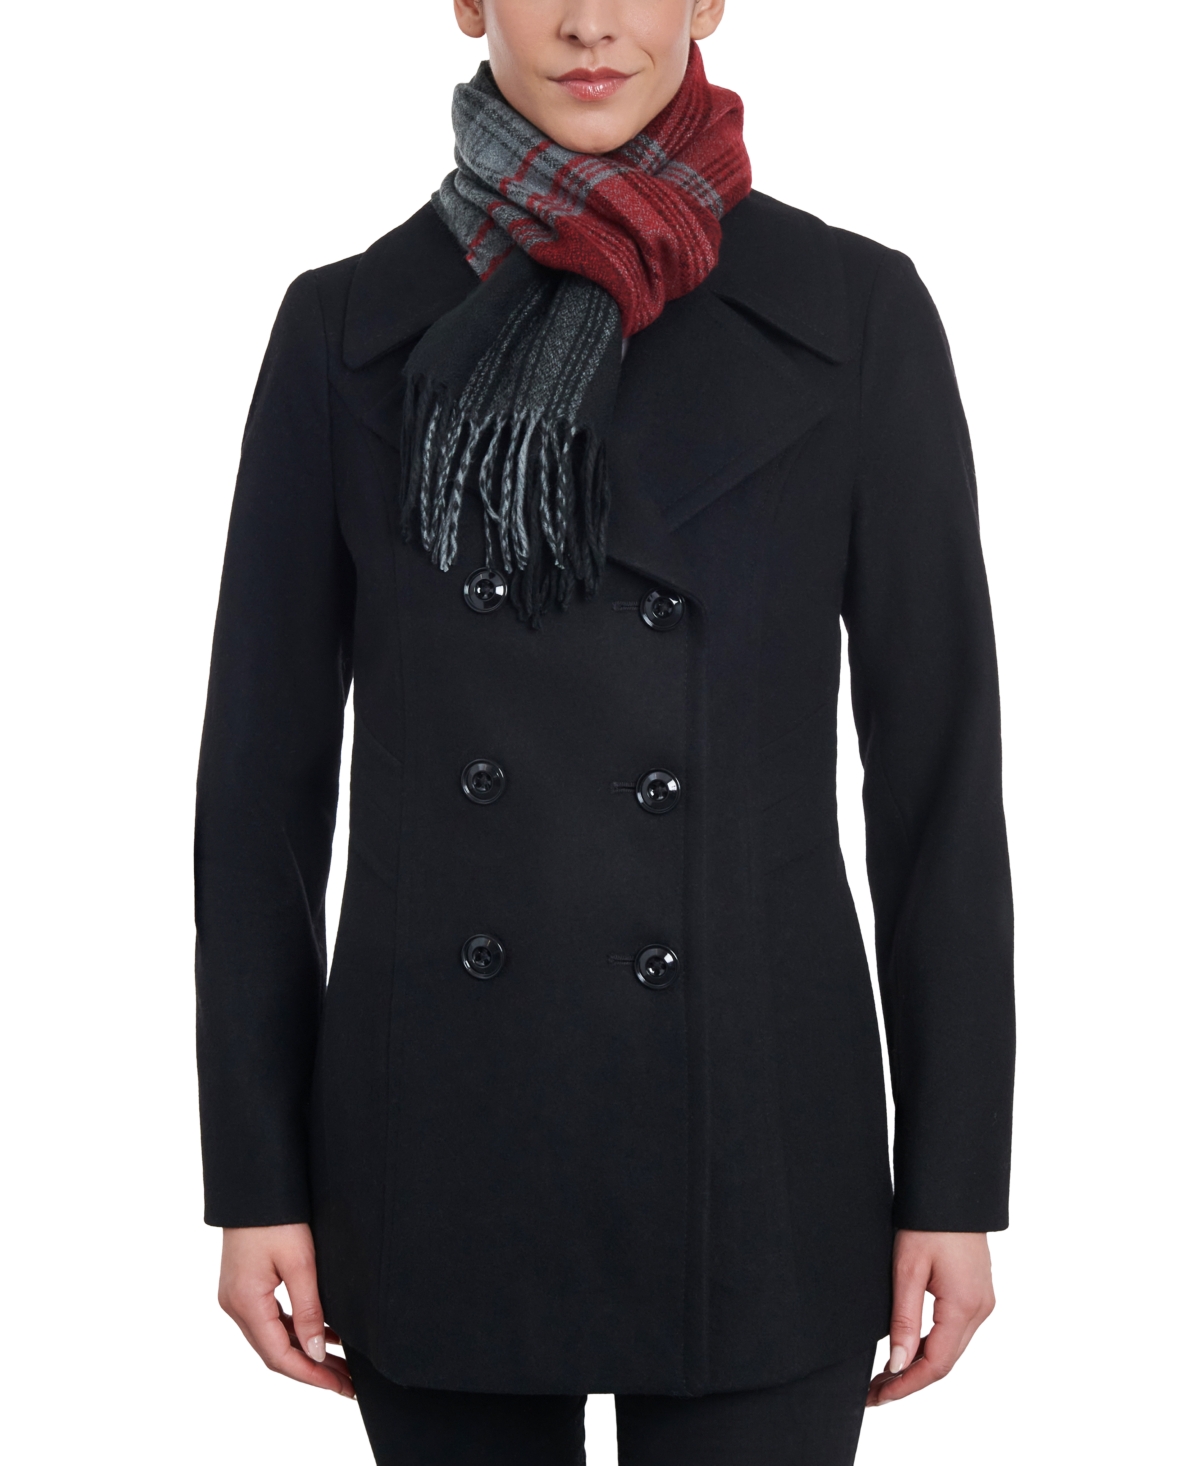 Women's Double-Breasted Wool Blend Peacoat & Plaid Scarf - Black